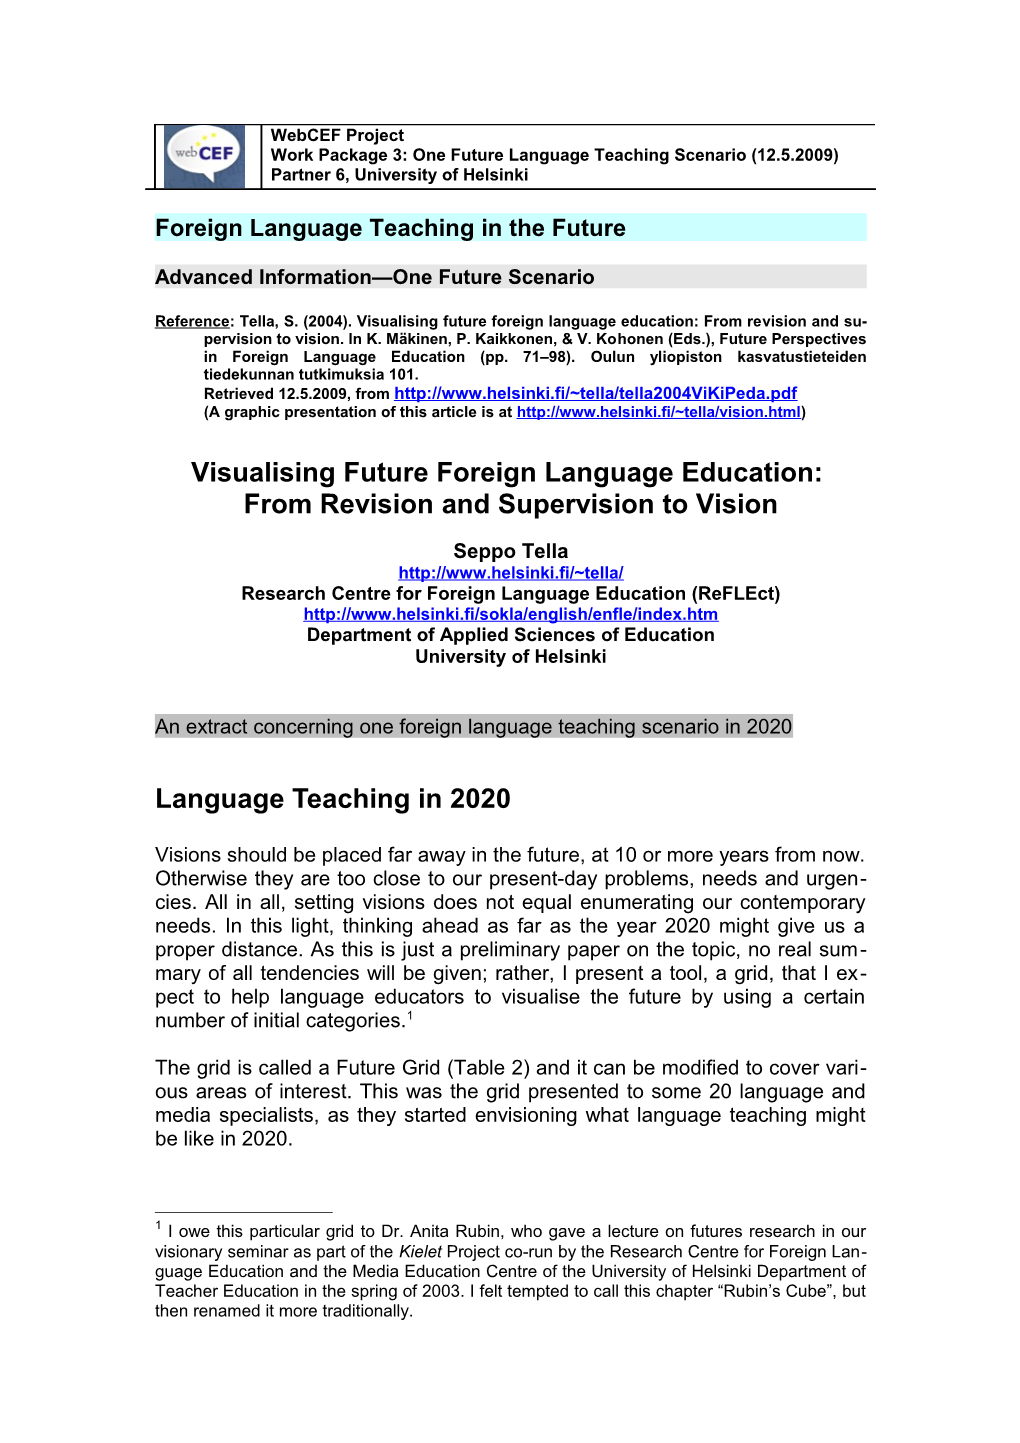 Foreign Language Teaching in the Future